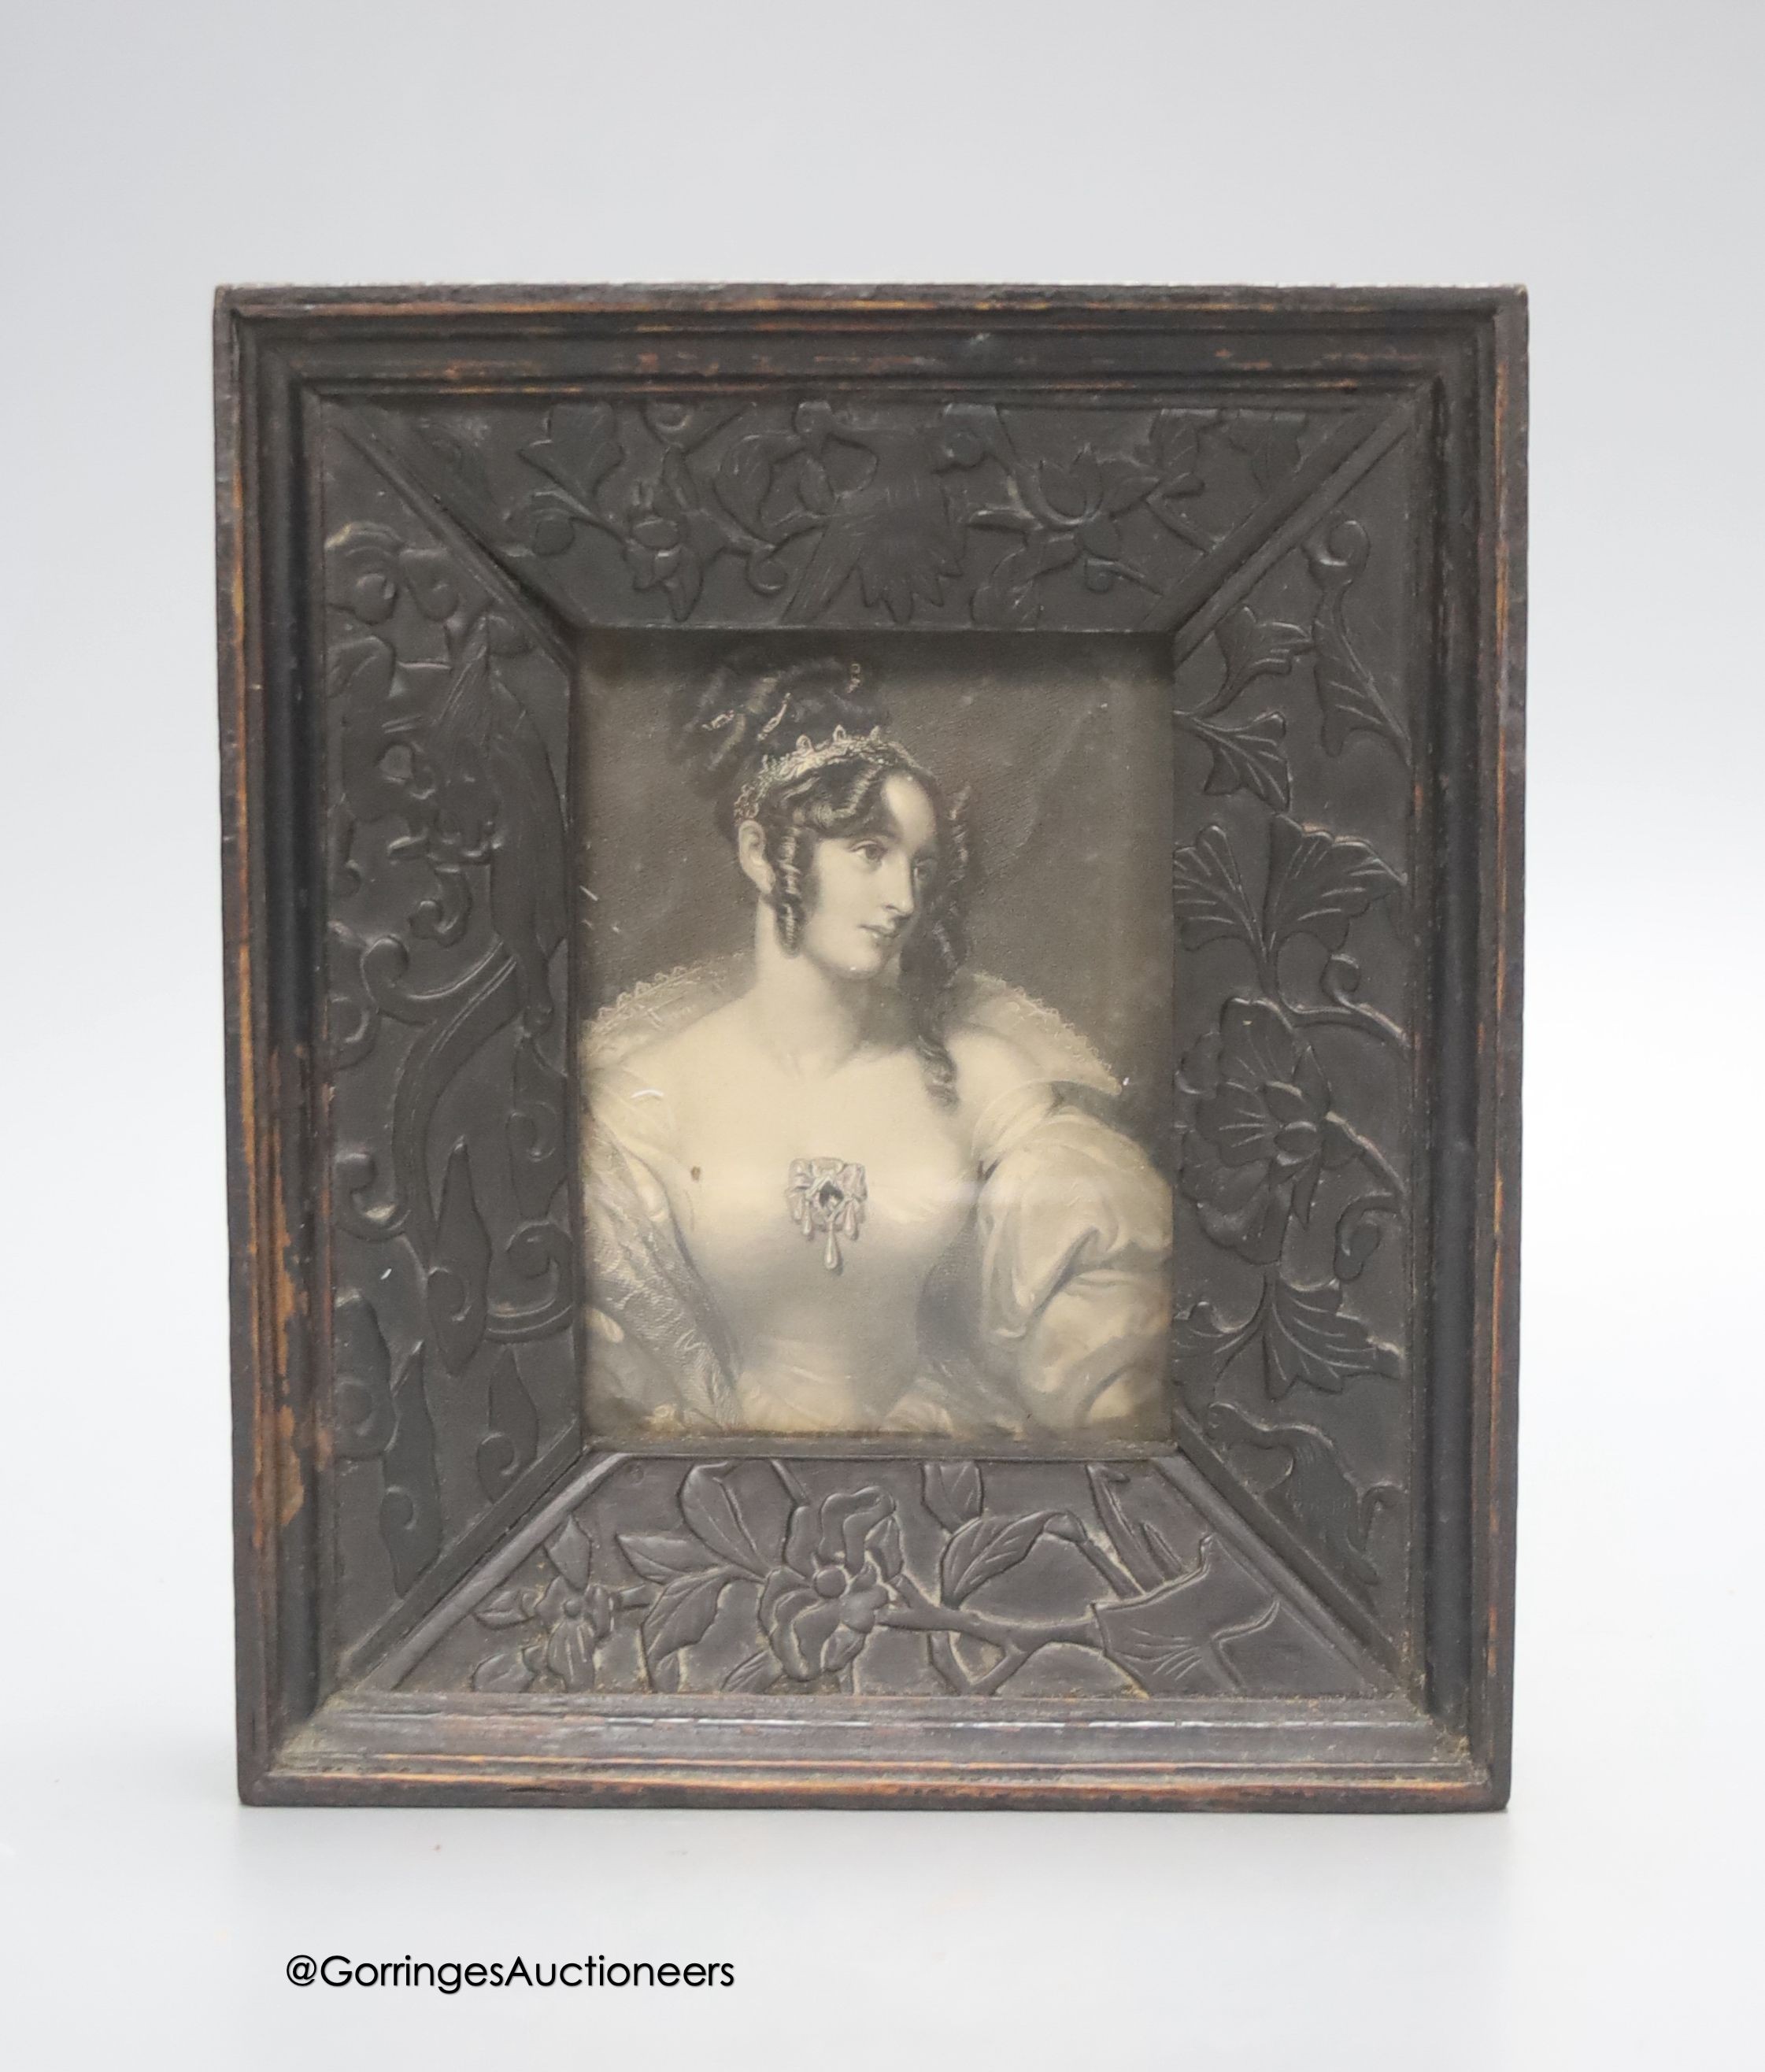 A 19th century frame, constructed with Chinese ebony relief carvings, 17 x 15cm overall